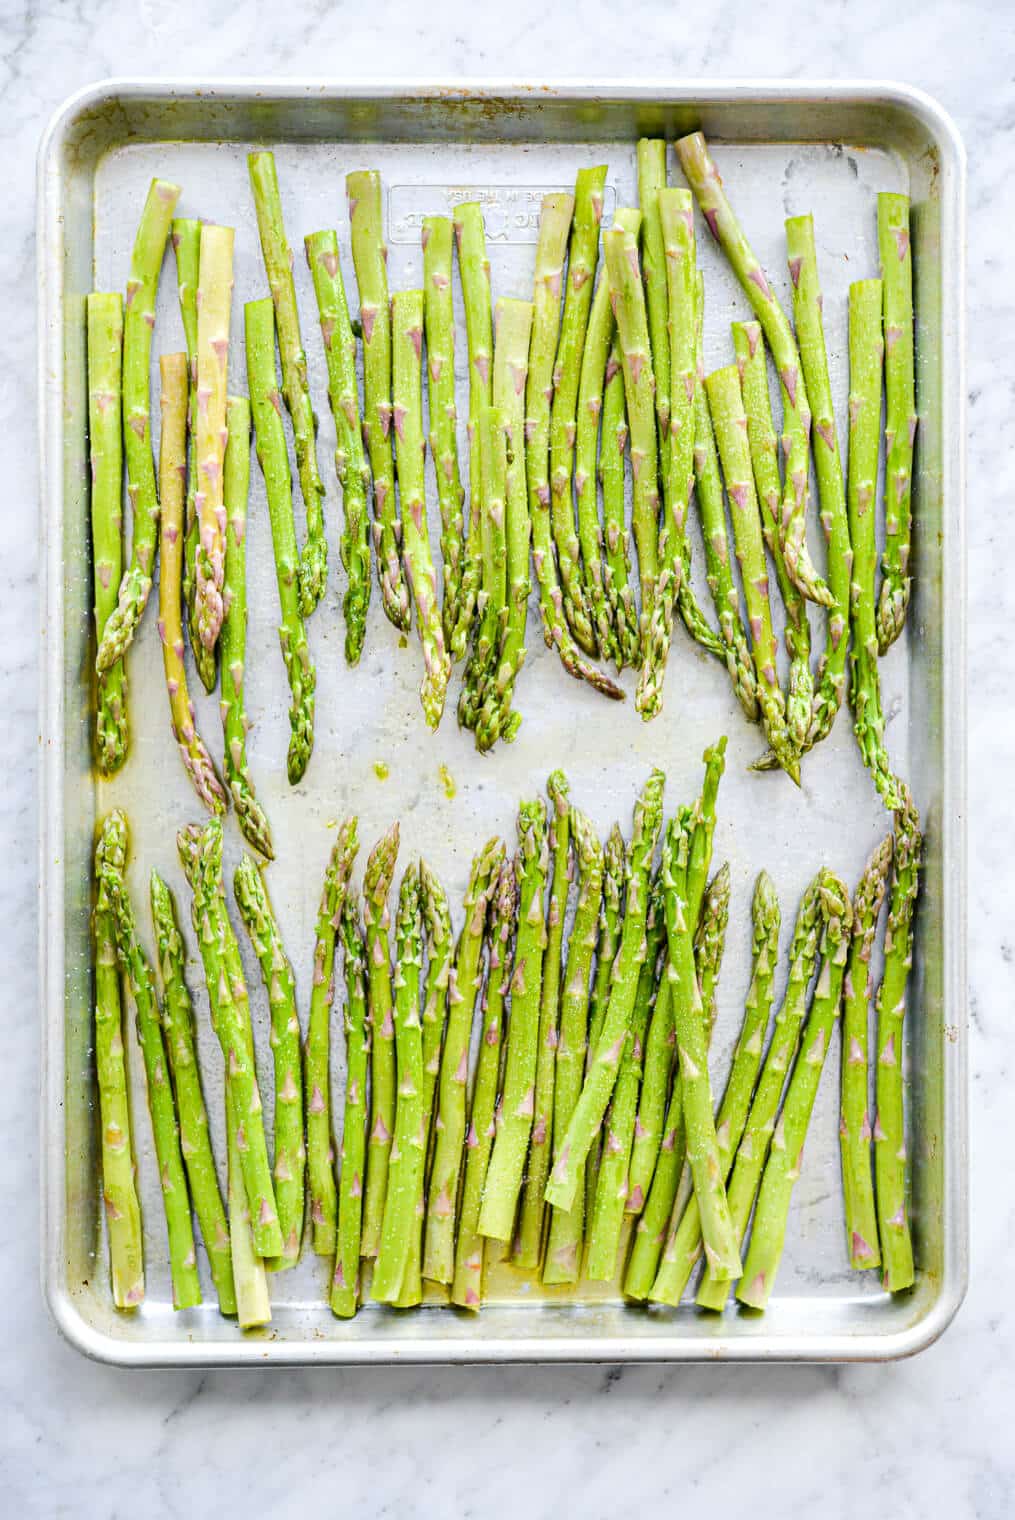 Aluminum sheet pan on grey and white marble countertop with two rows of asparagus